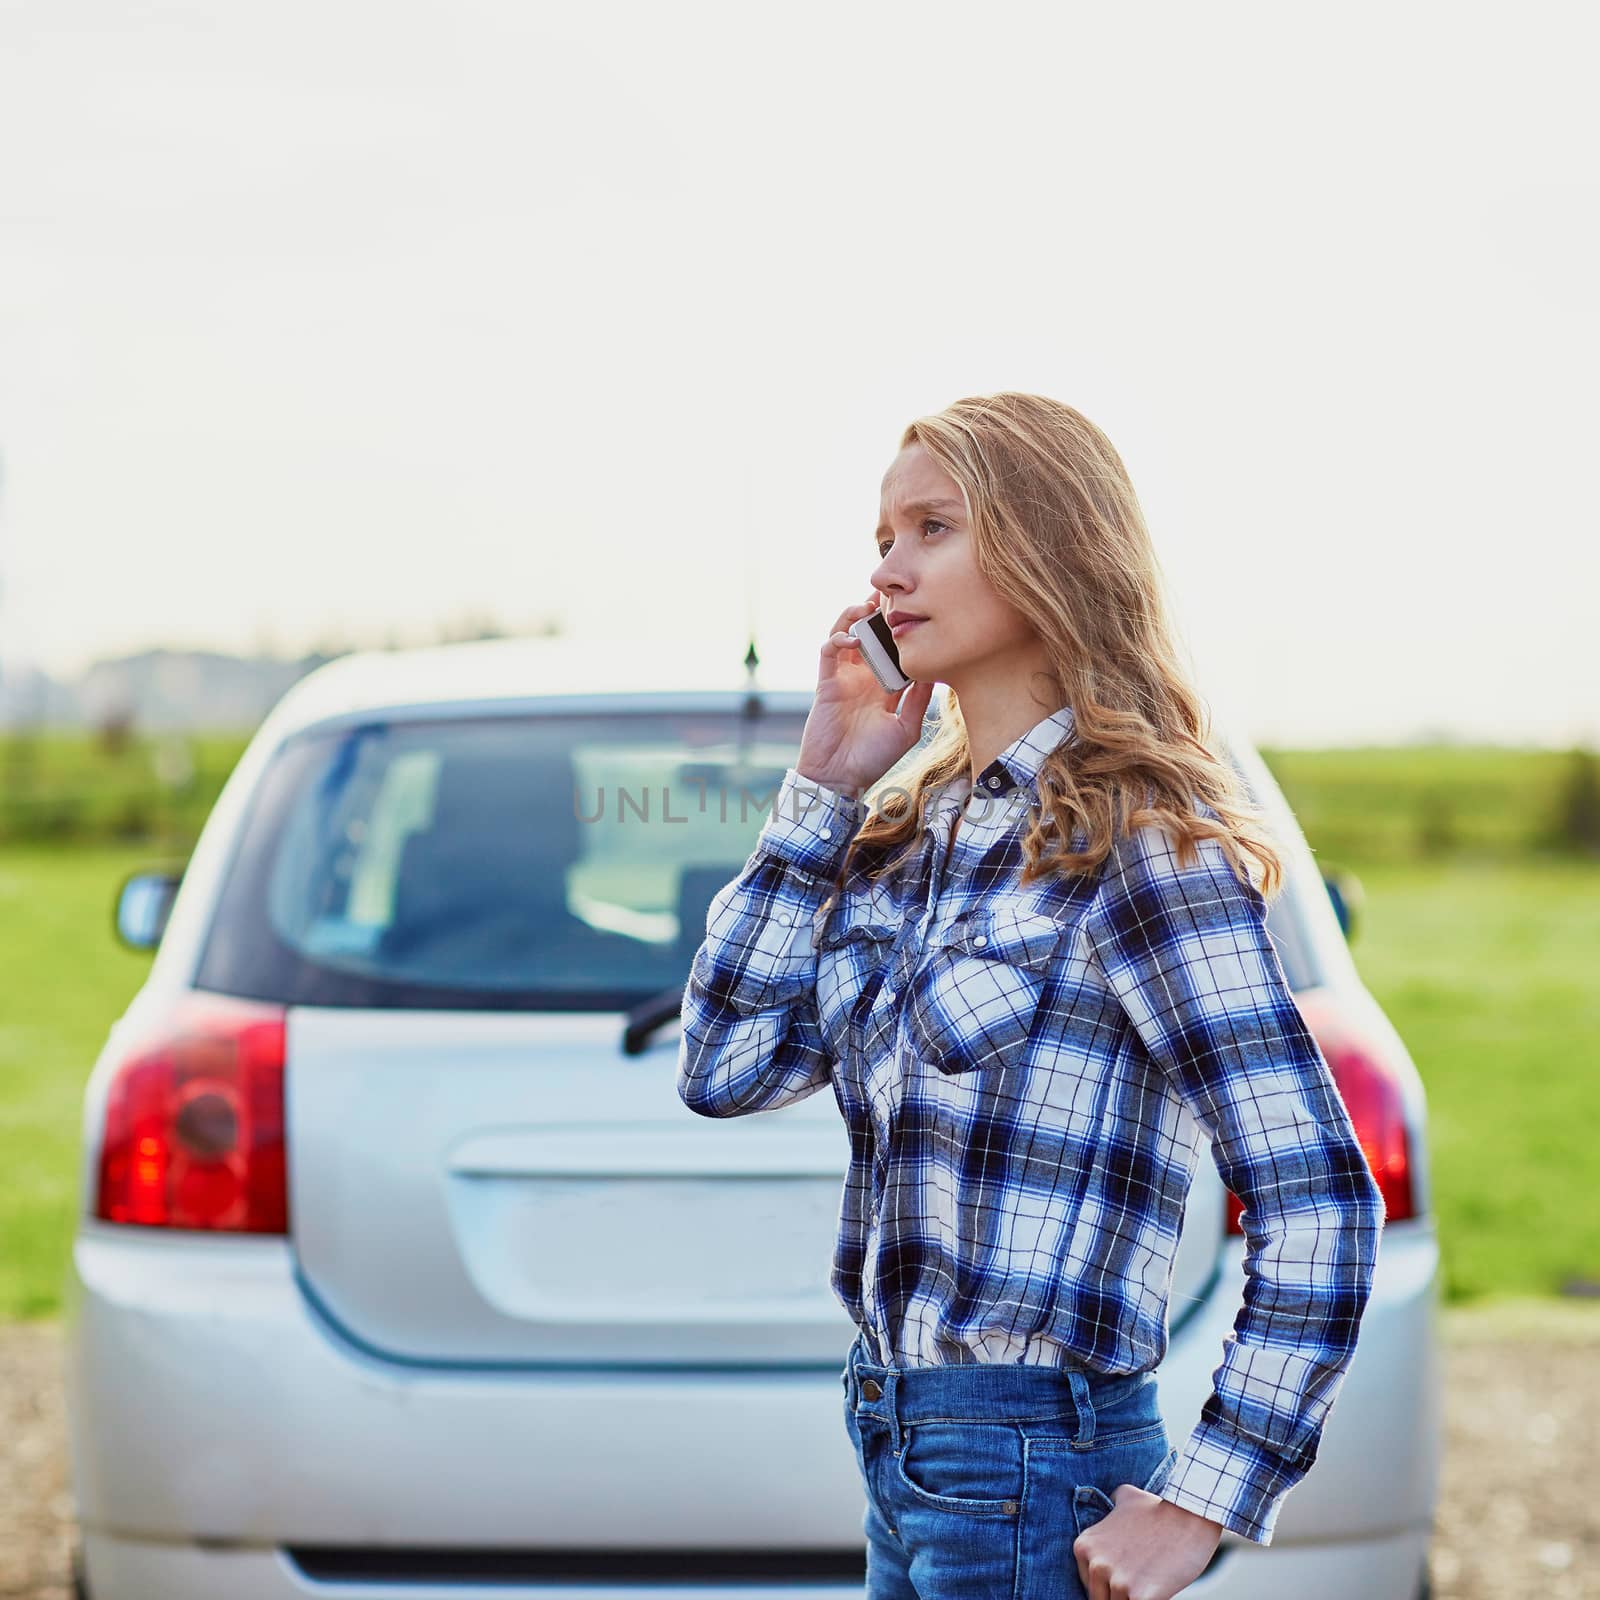 Young woman on the road near a broken car calling for help